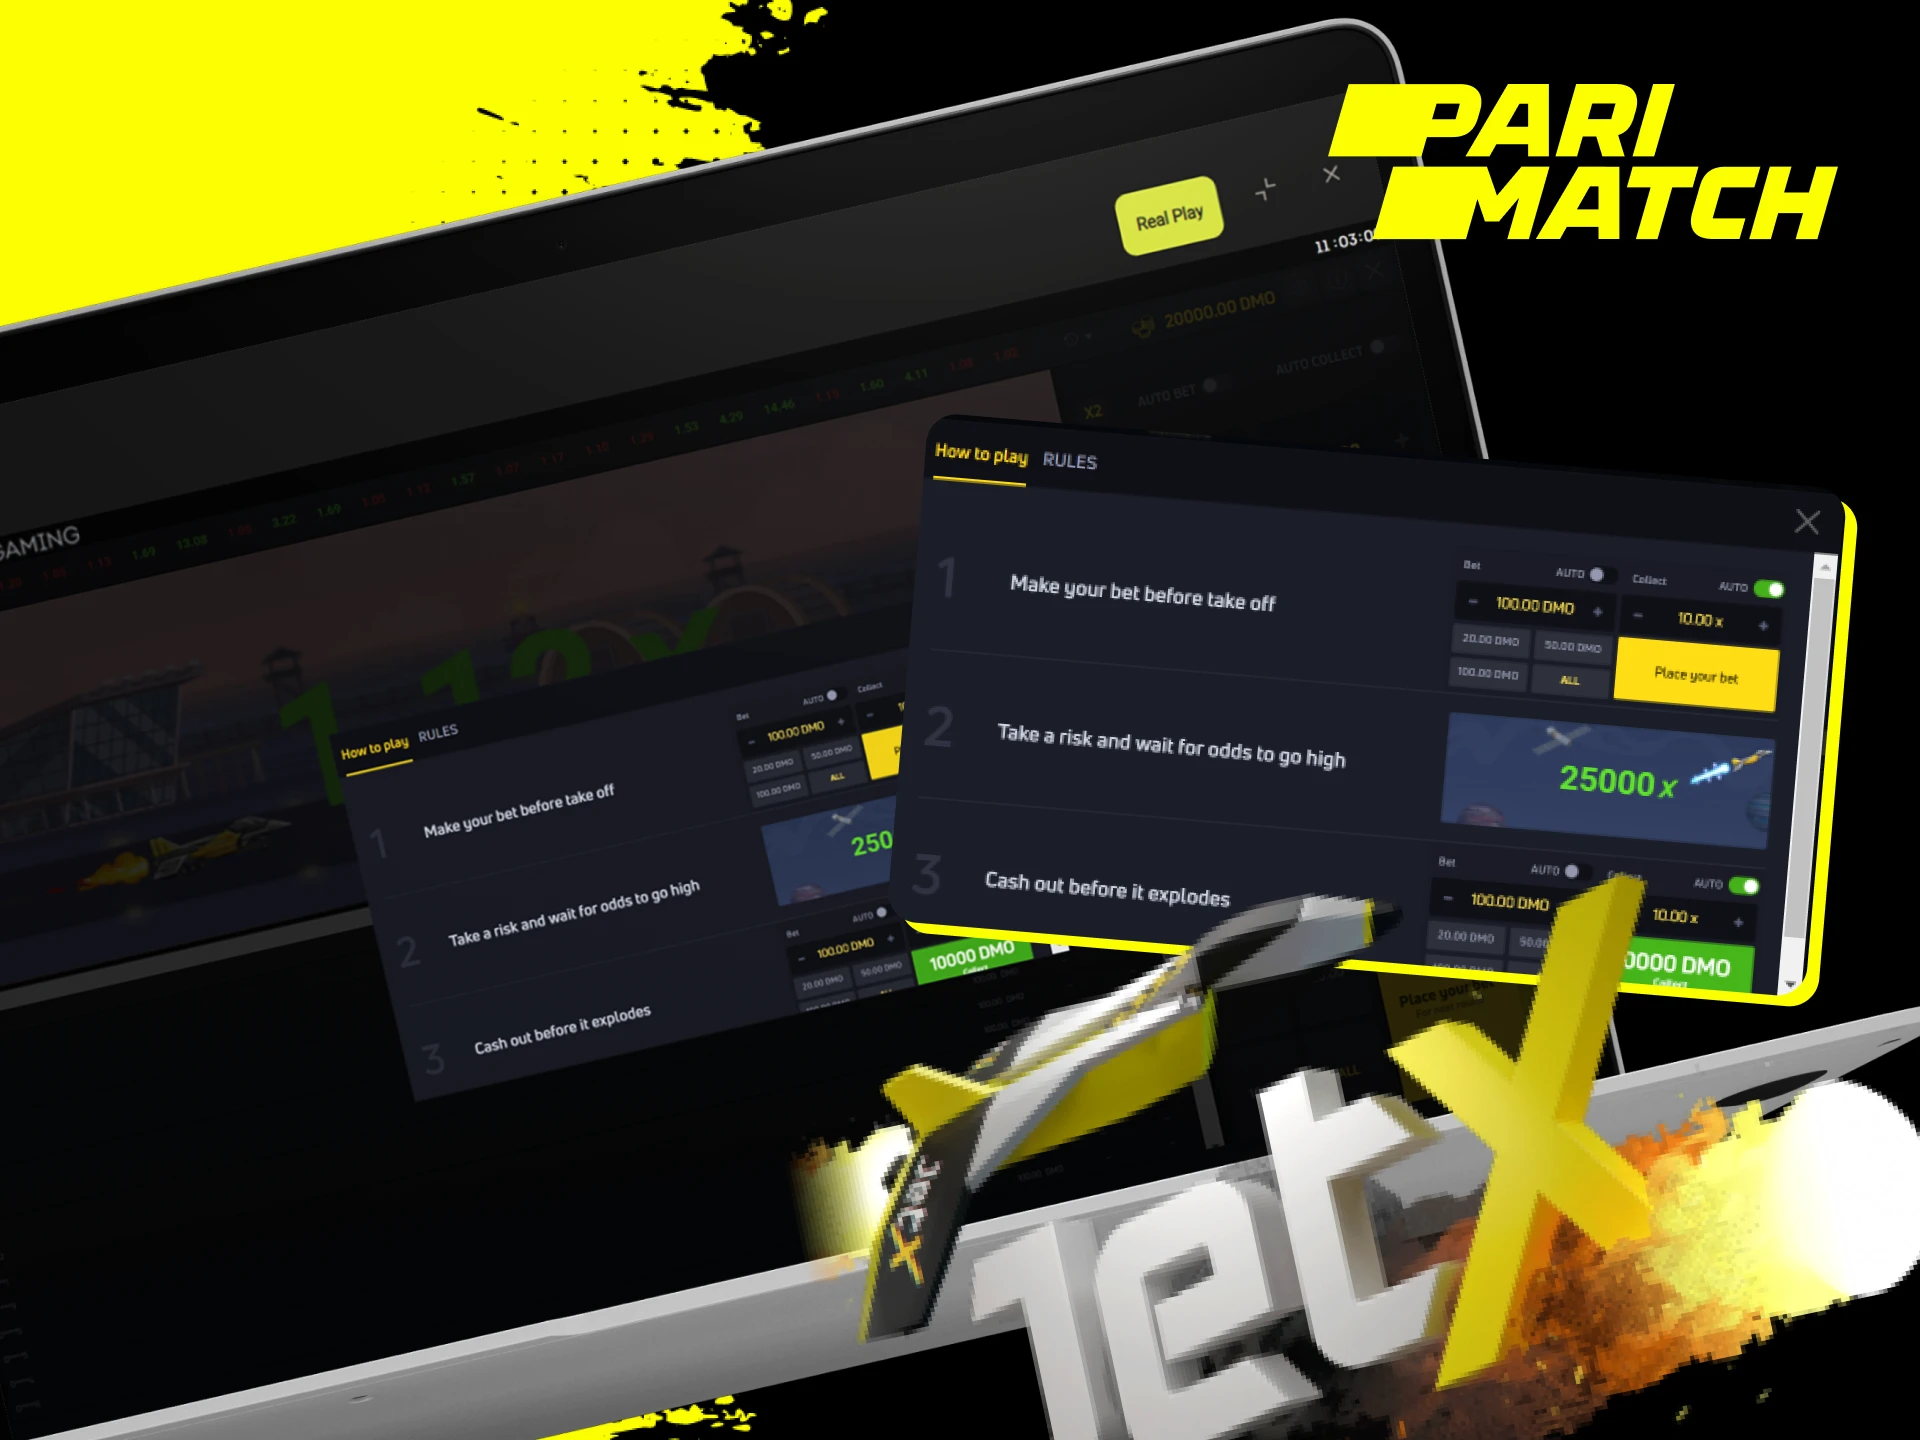 What are the rules of the JetX game on the Parimatch online casino website.